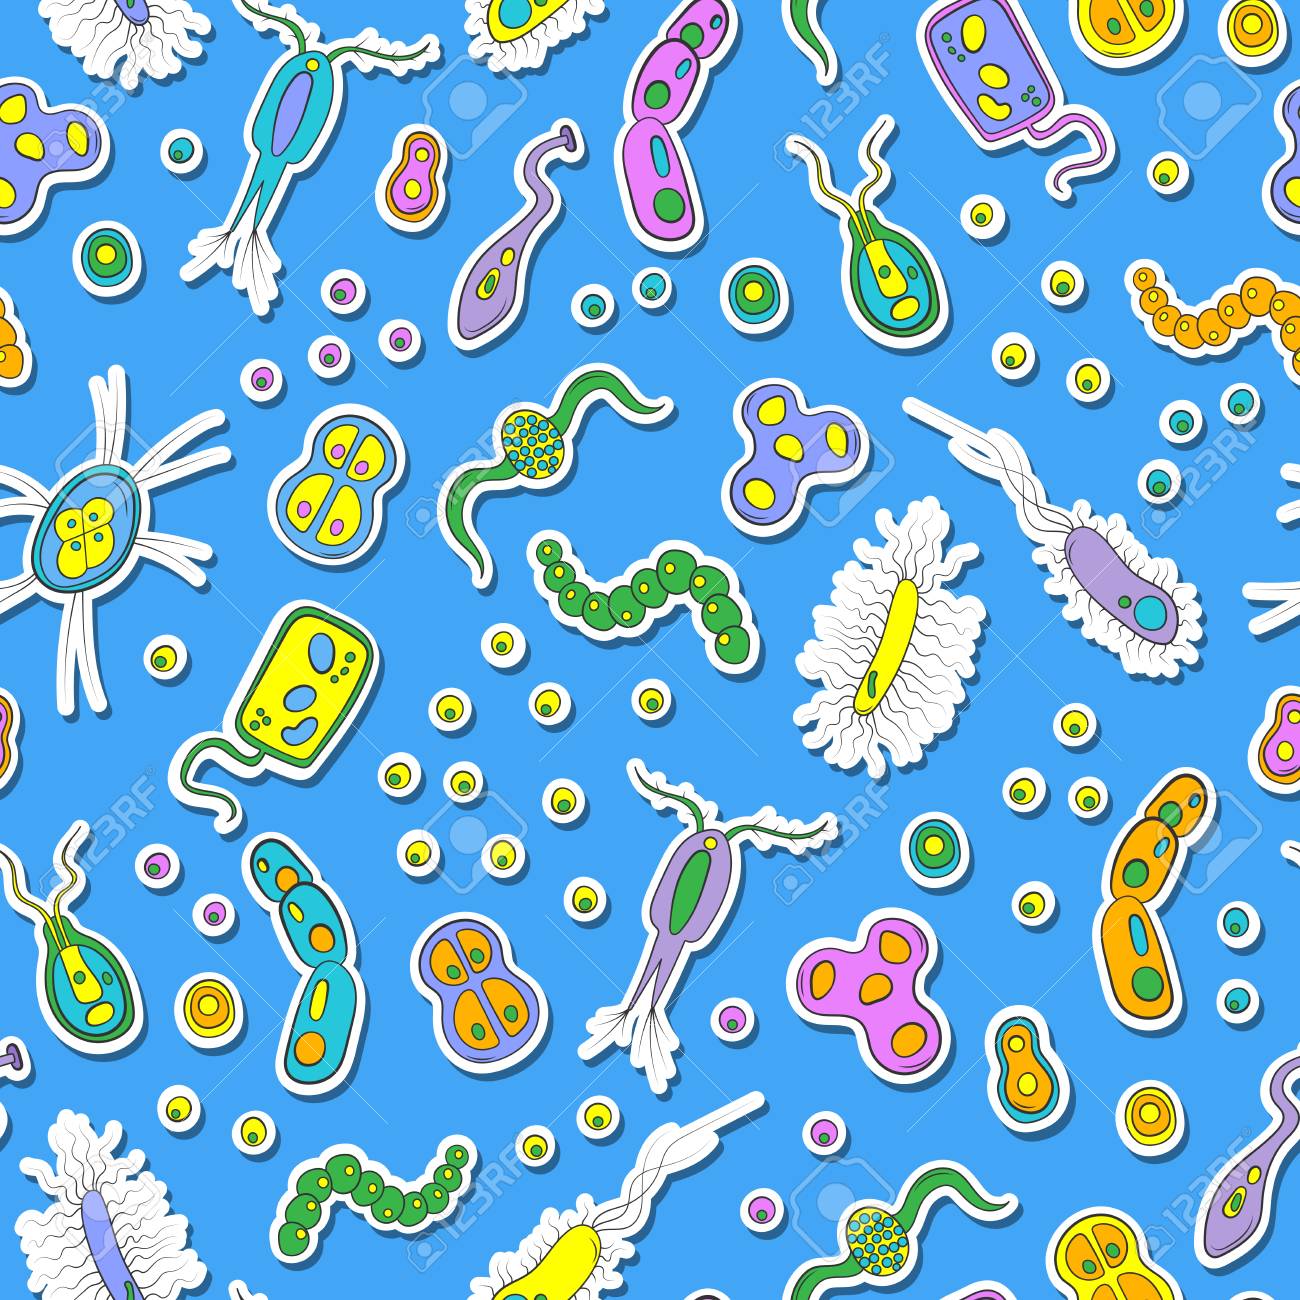 Seamless Pattern With Image Of Bacteria Germs And Viruses On